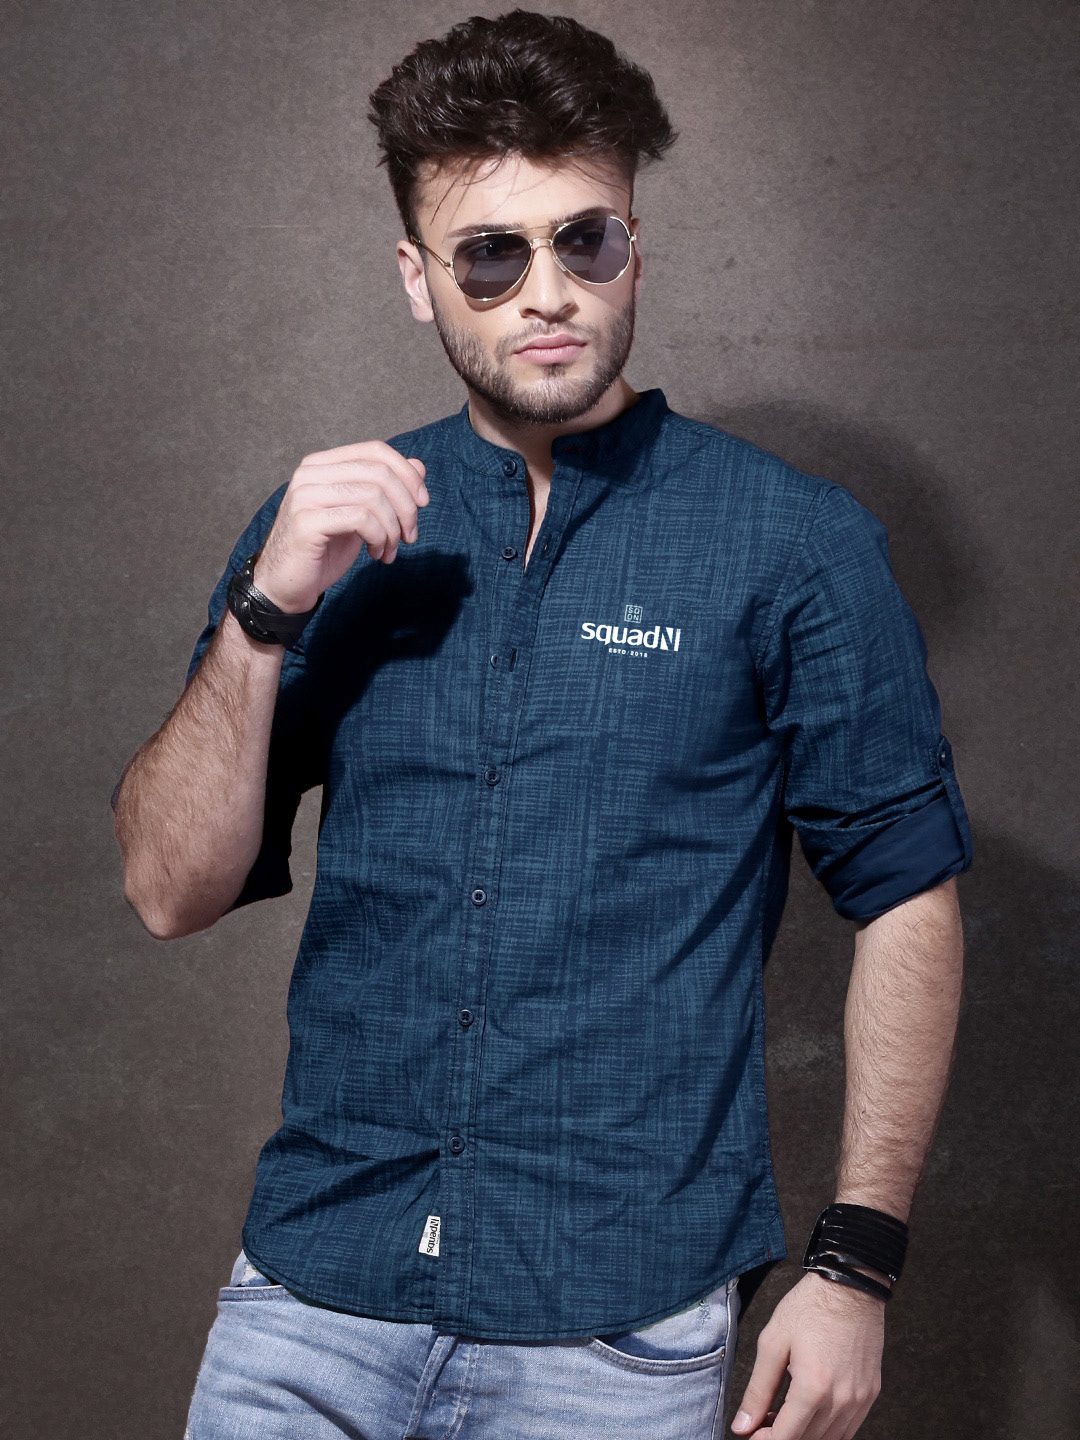 New brand Fashion Clothing men brand exclusive collection registered trademark